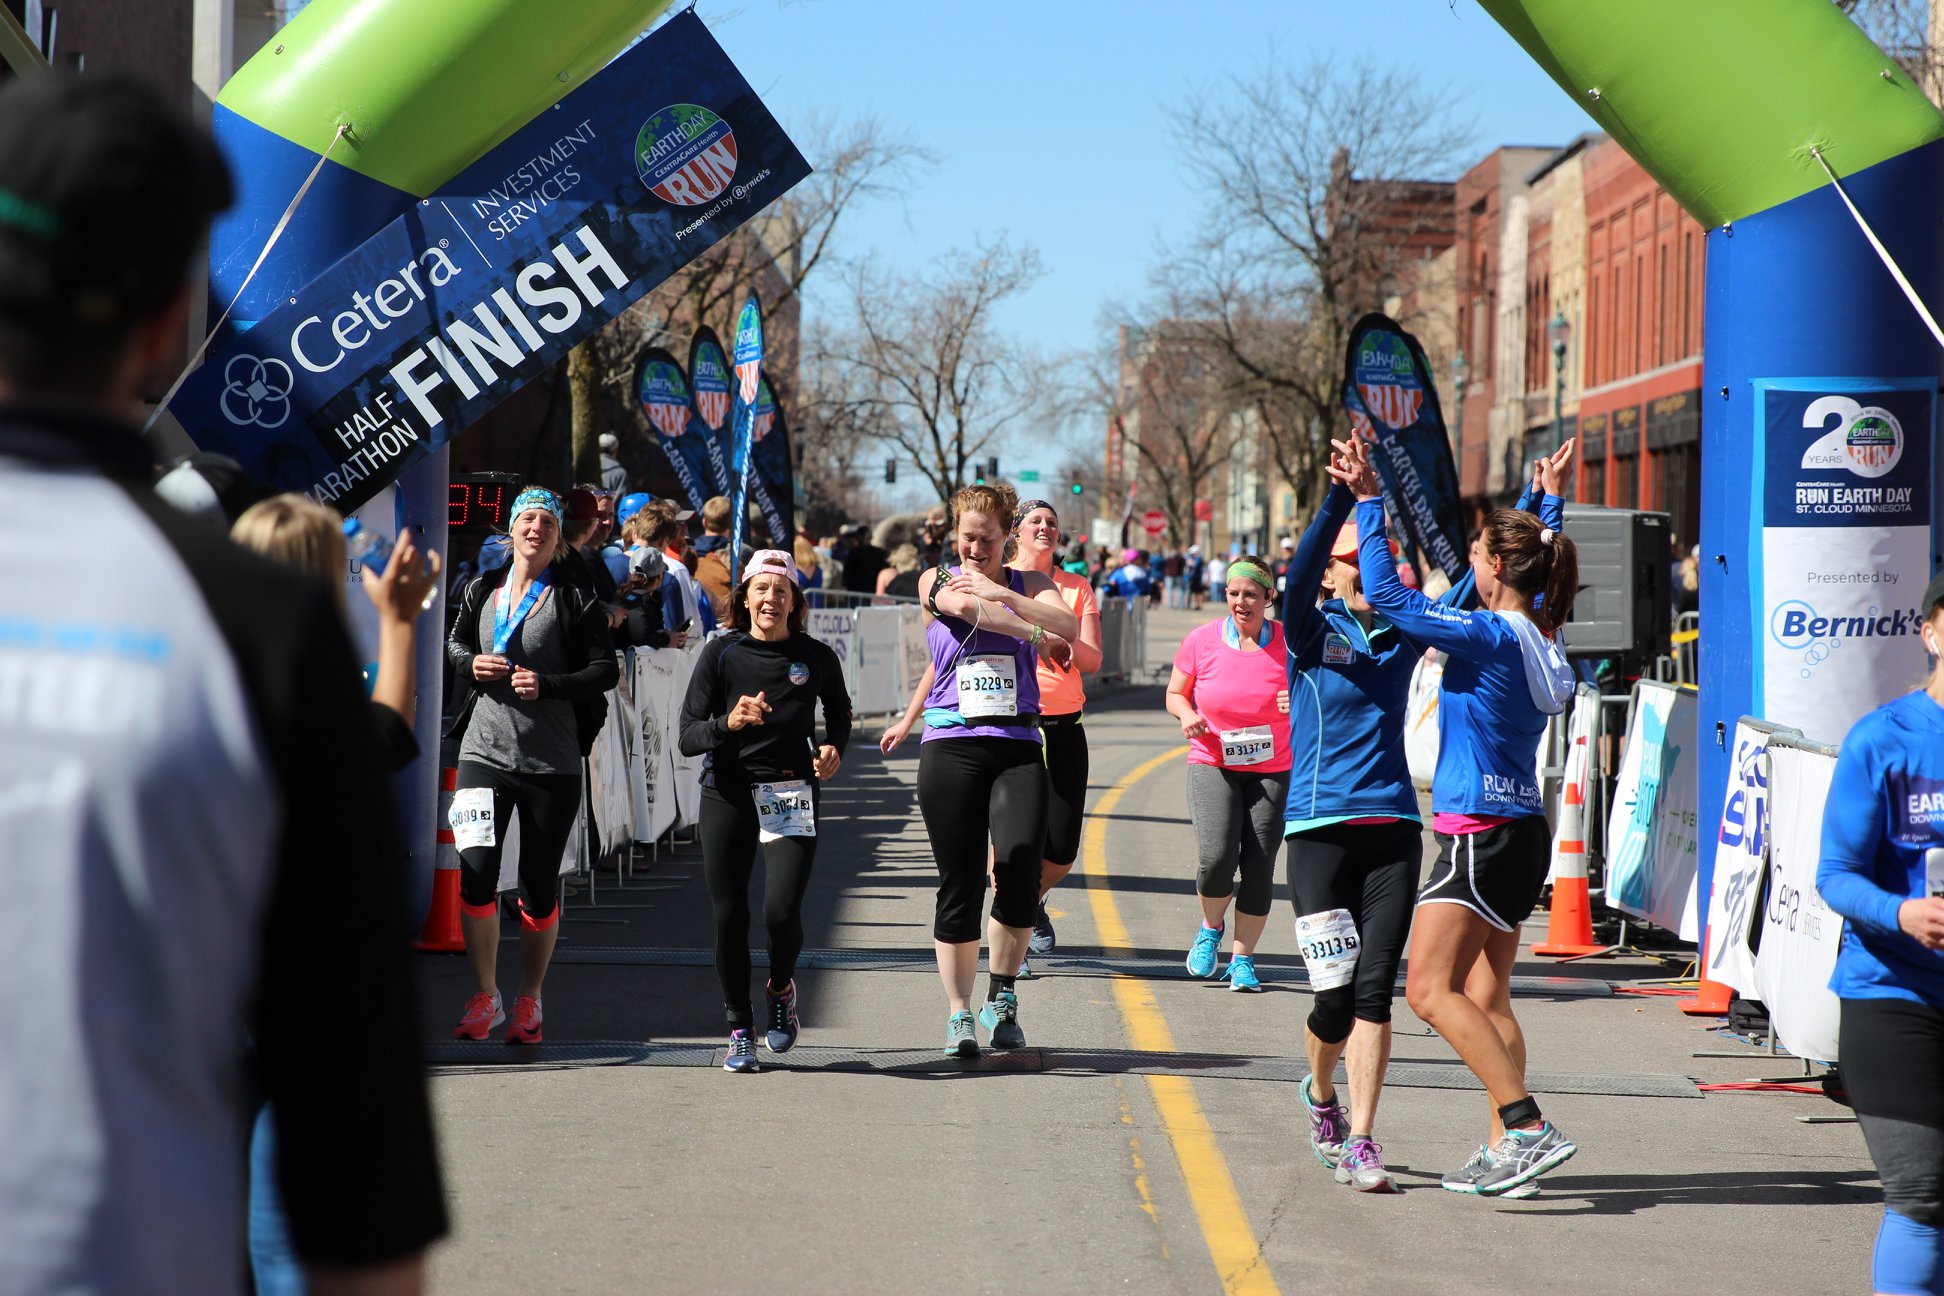 Runners cross the finish line at Earth Day Run in St. Cloud, Minnesota